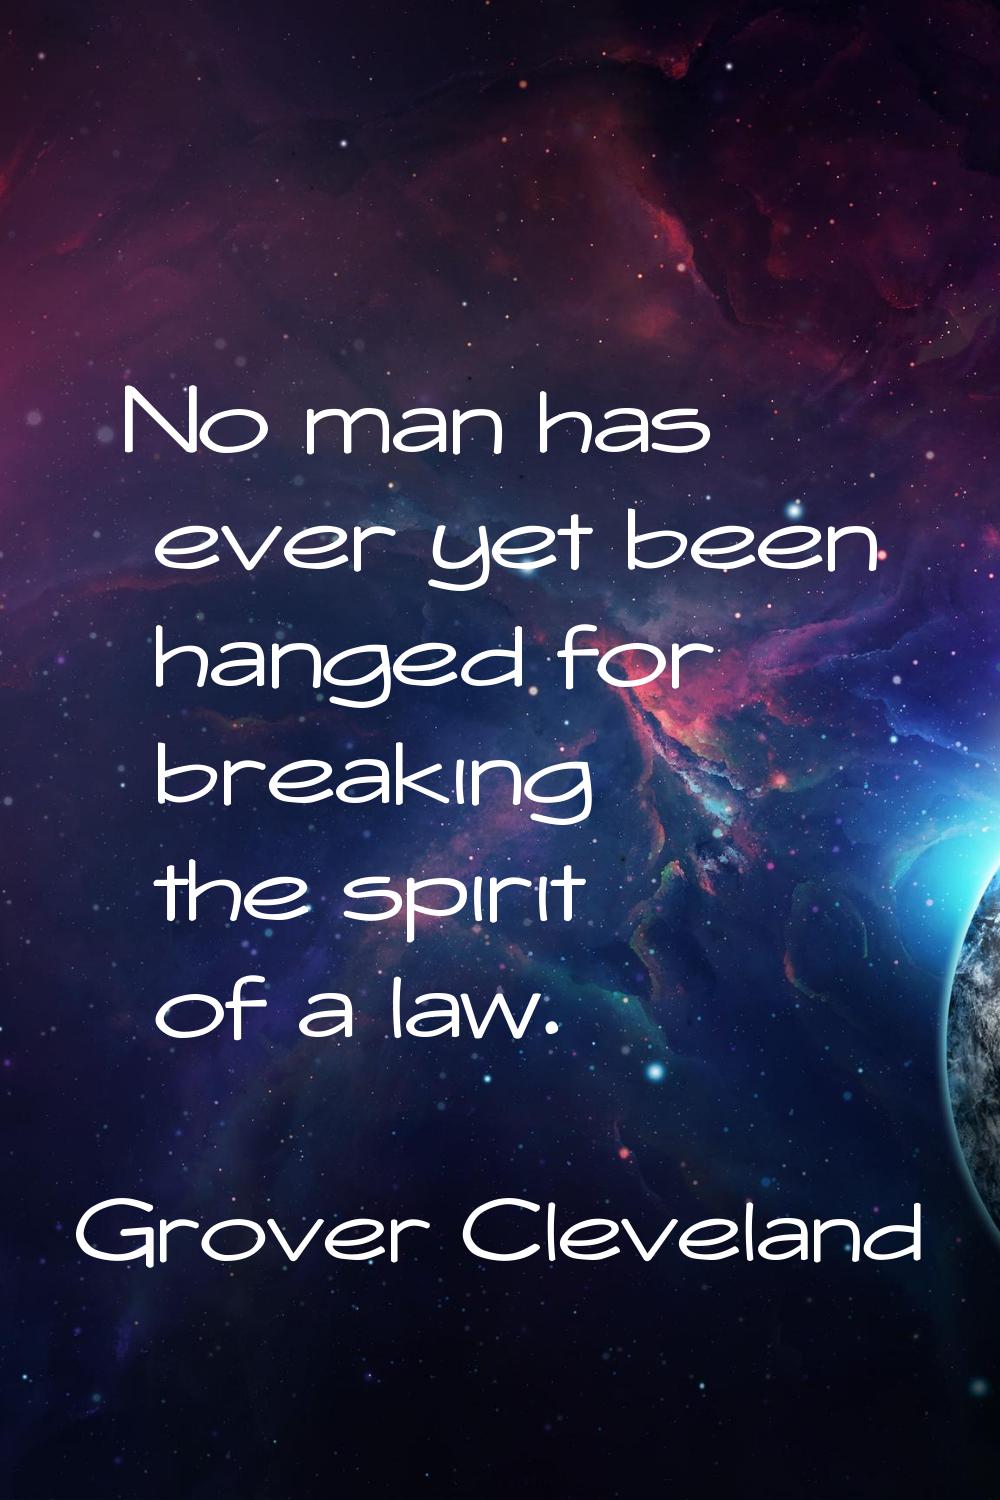 No man has ever yet been hanged for breaking the spirit of a law.